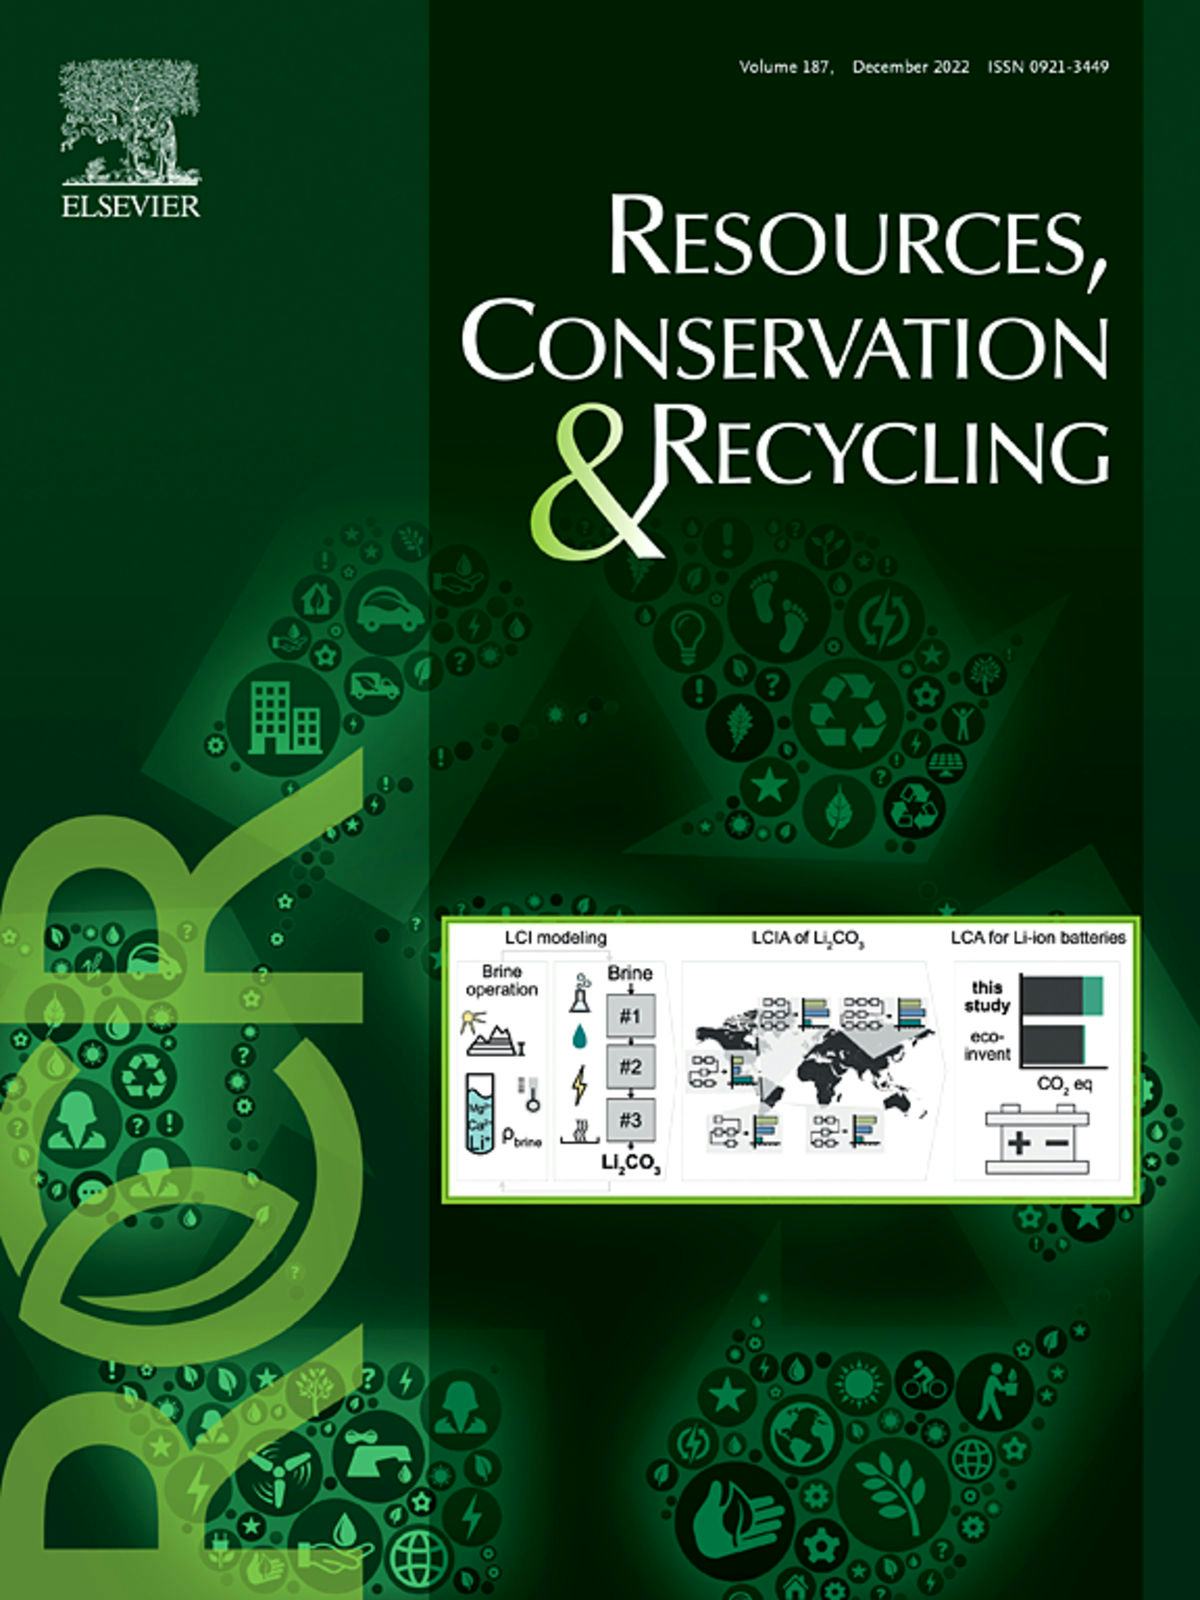 Resources, Conservation and Recycling book cover, volume 187, December 2022.